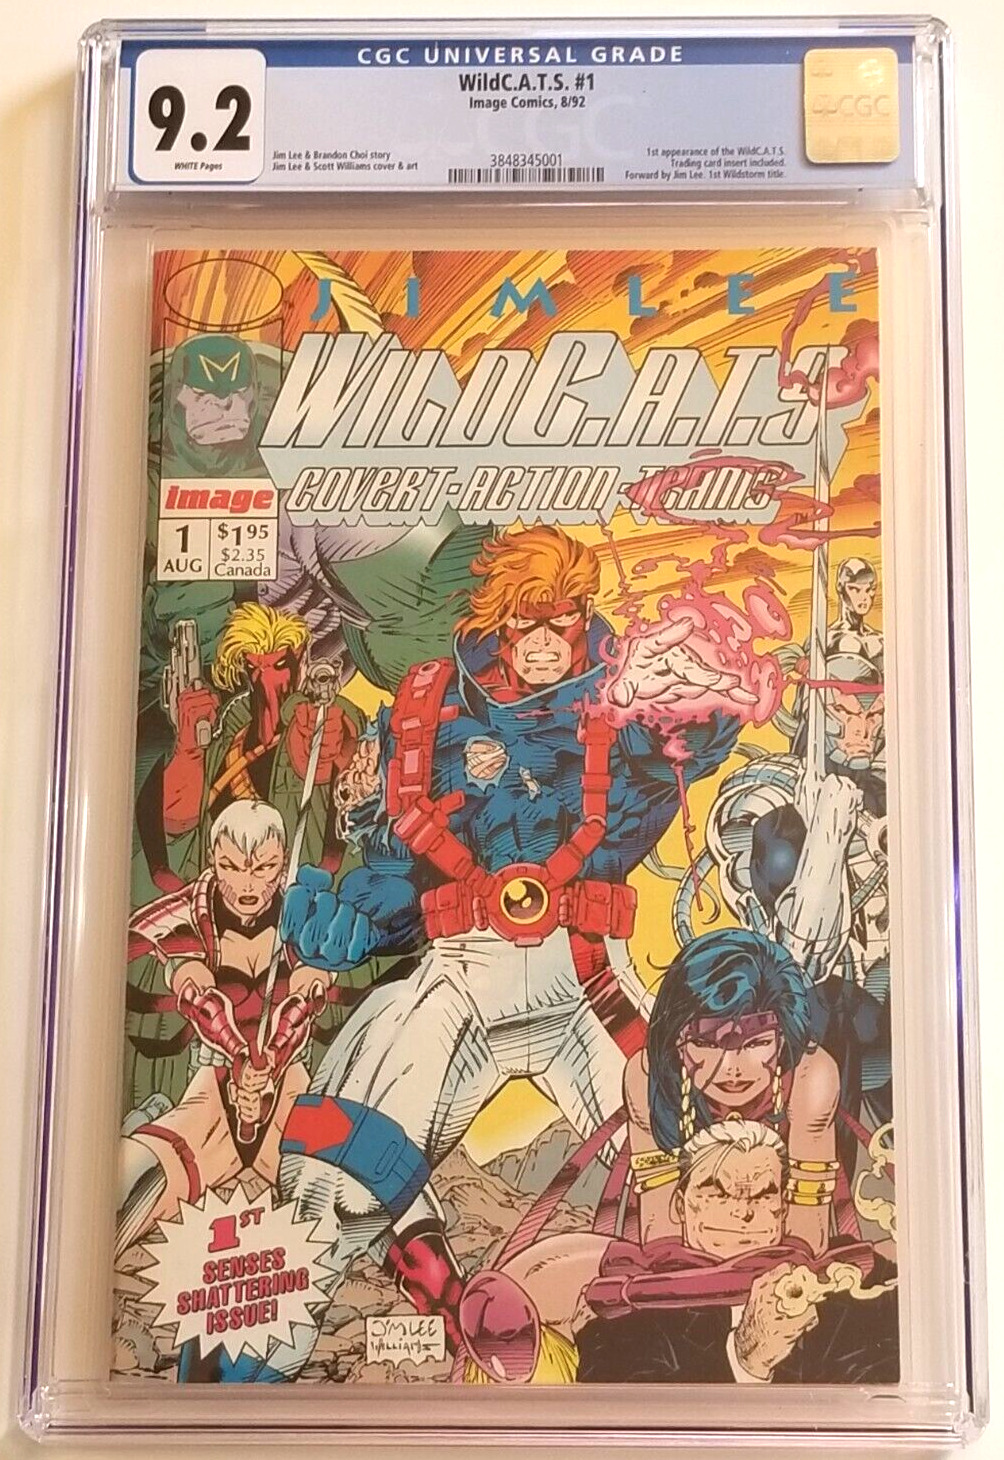 WildC.A.T.S Issue #1 CGC 9.2 N Mint-, 1st Appearance, Card Included, Image